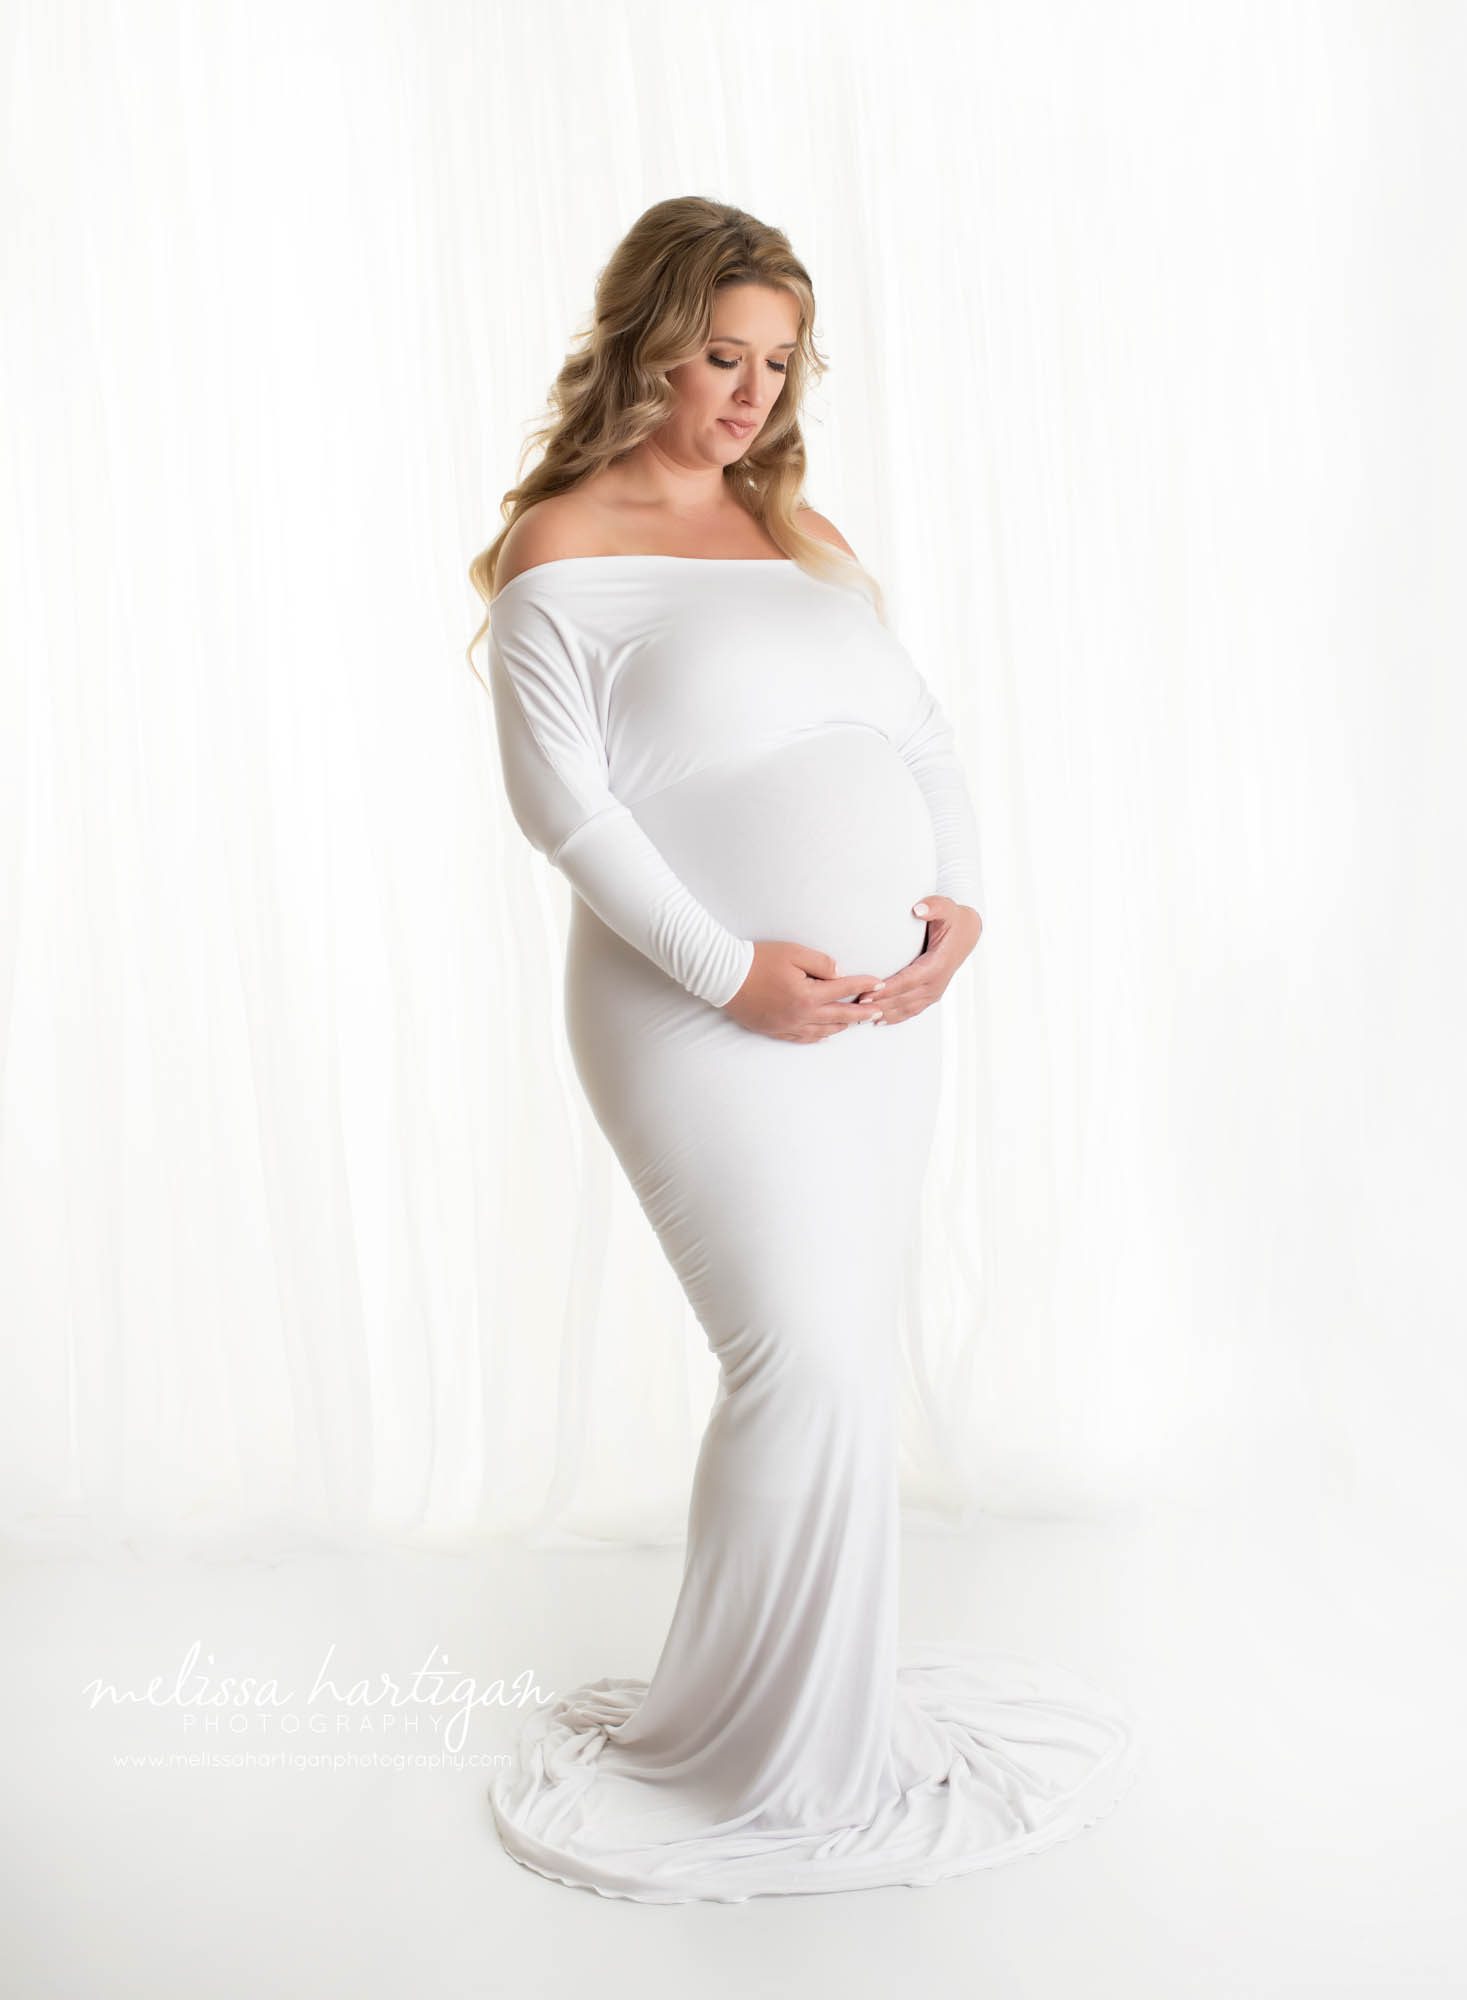 pregnant mom standing in photography studio holding belly wearing white maternity gown CT maternity Photography